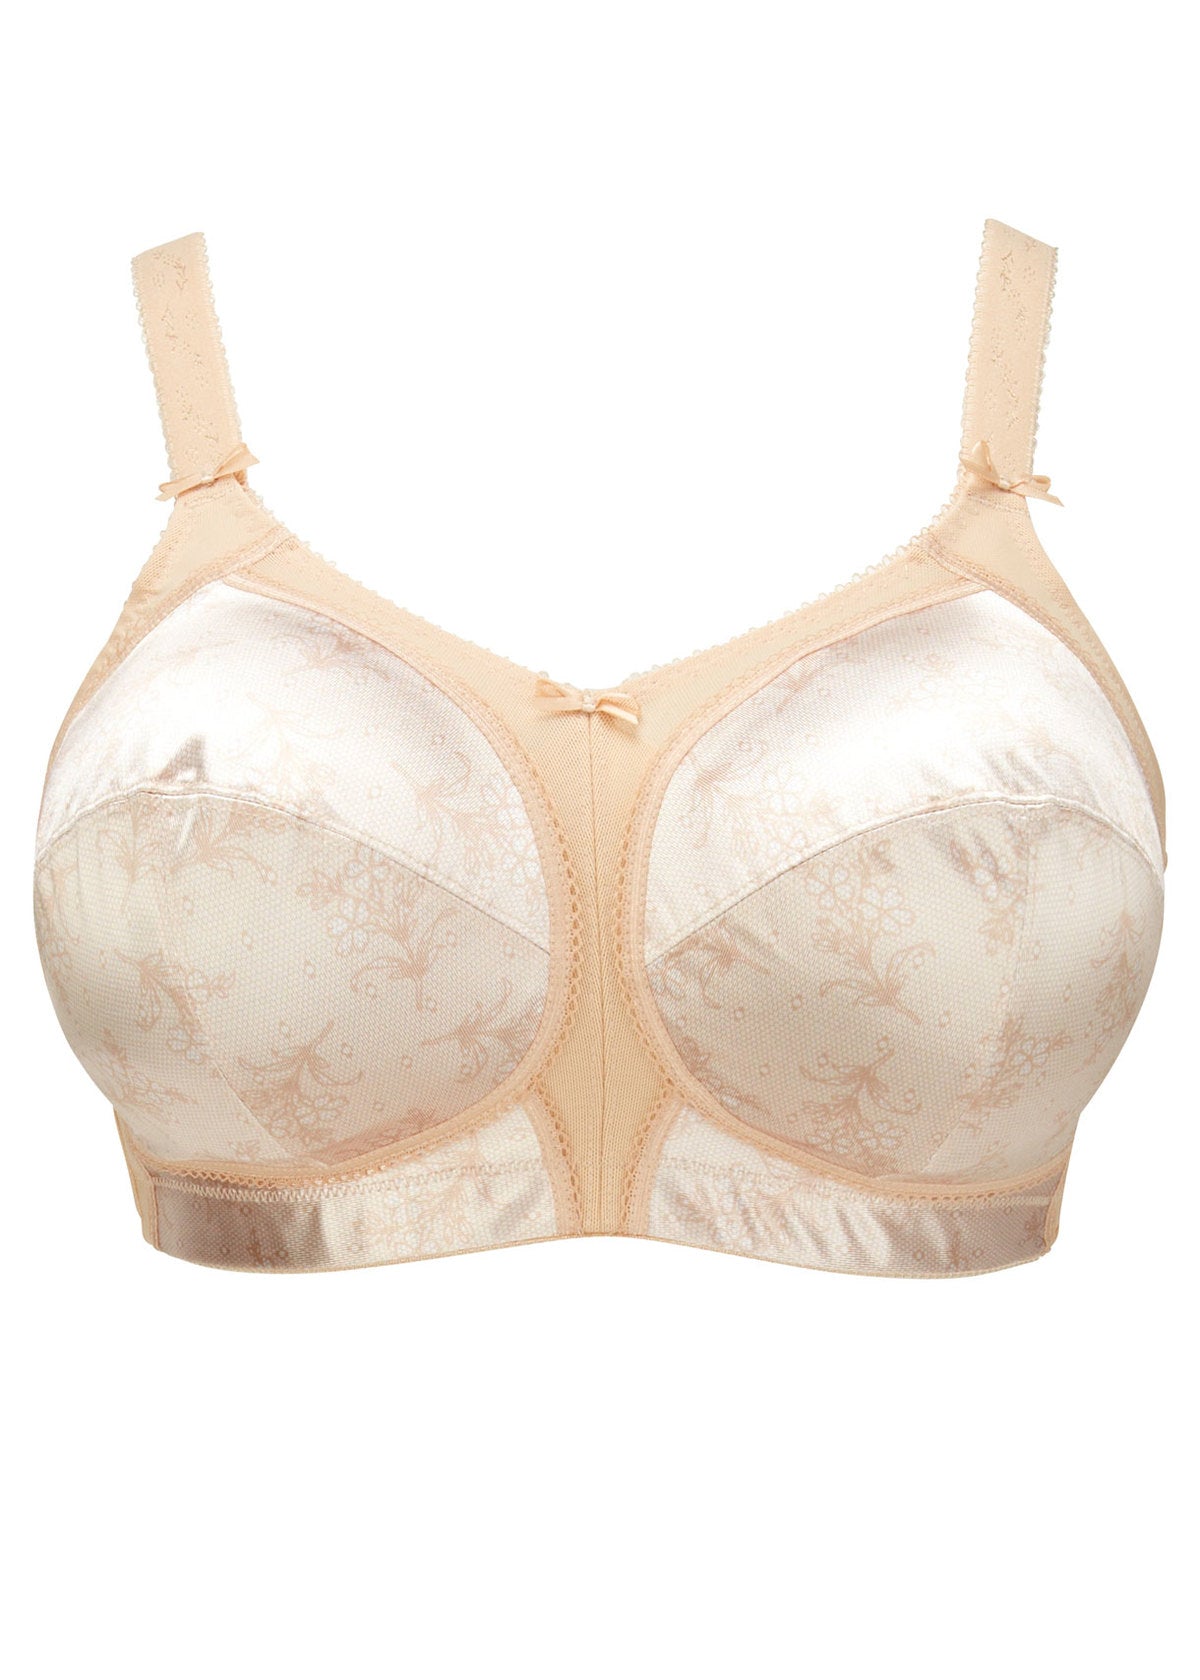 Buy Latte Nude Recycled Lace Full Cup Comfort Bra - 32DD, Bras